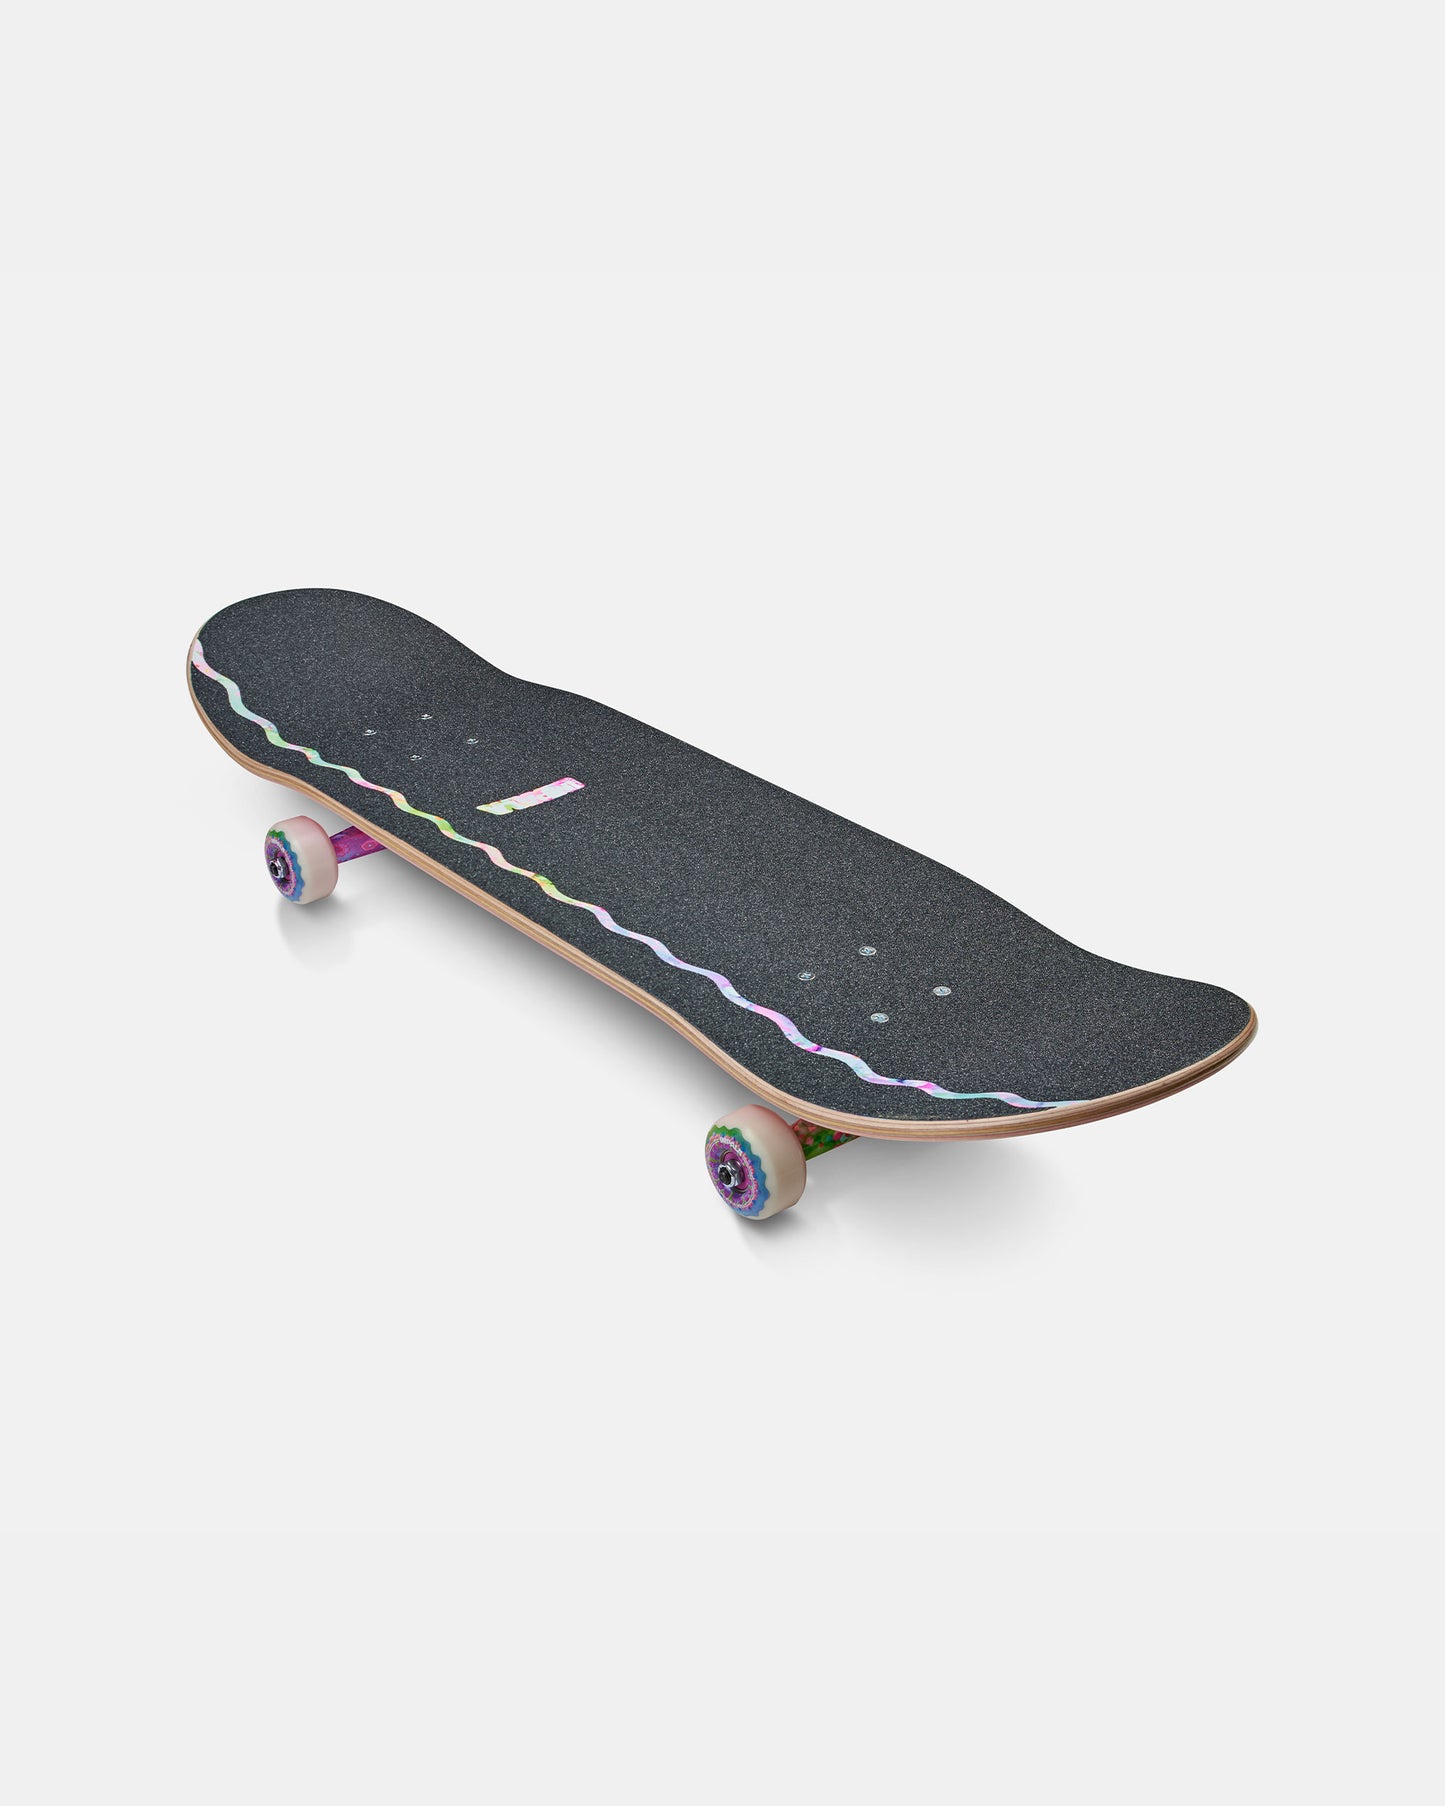 Front angled of Pip and Pop Skateboard - Candy Mountain